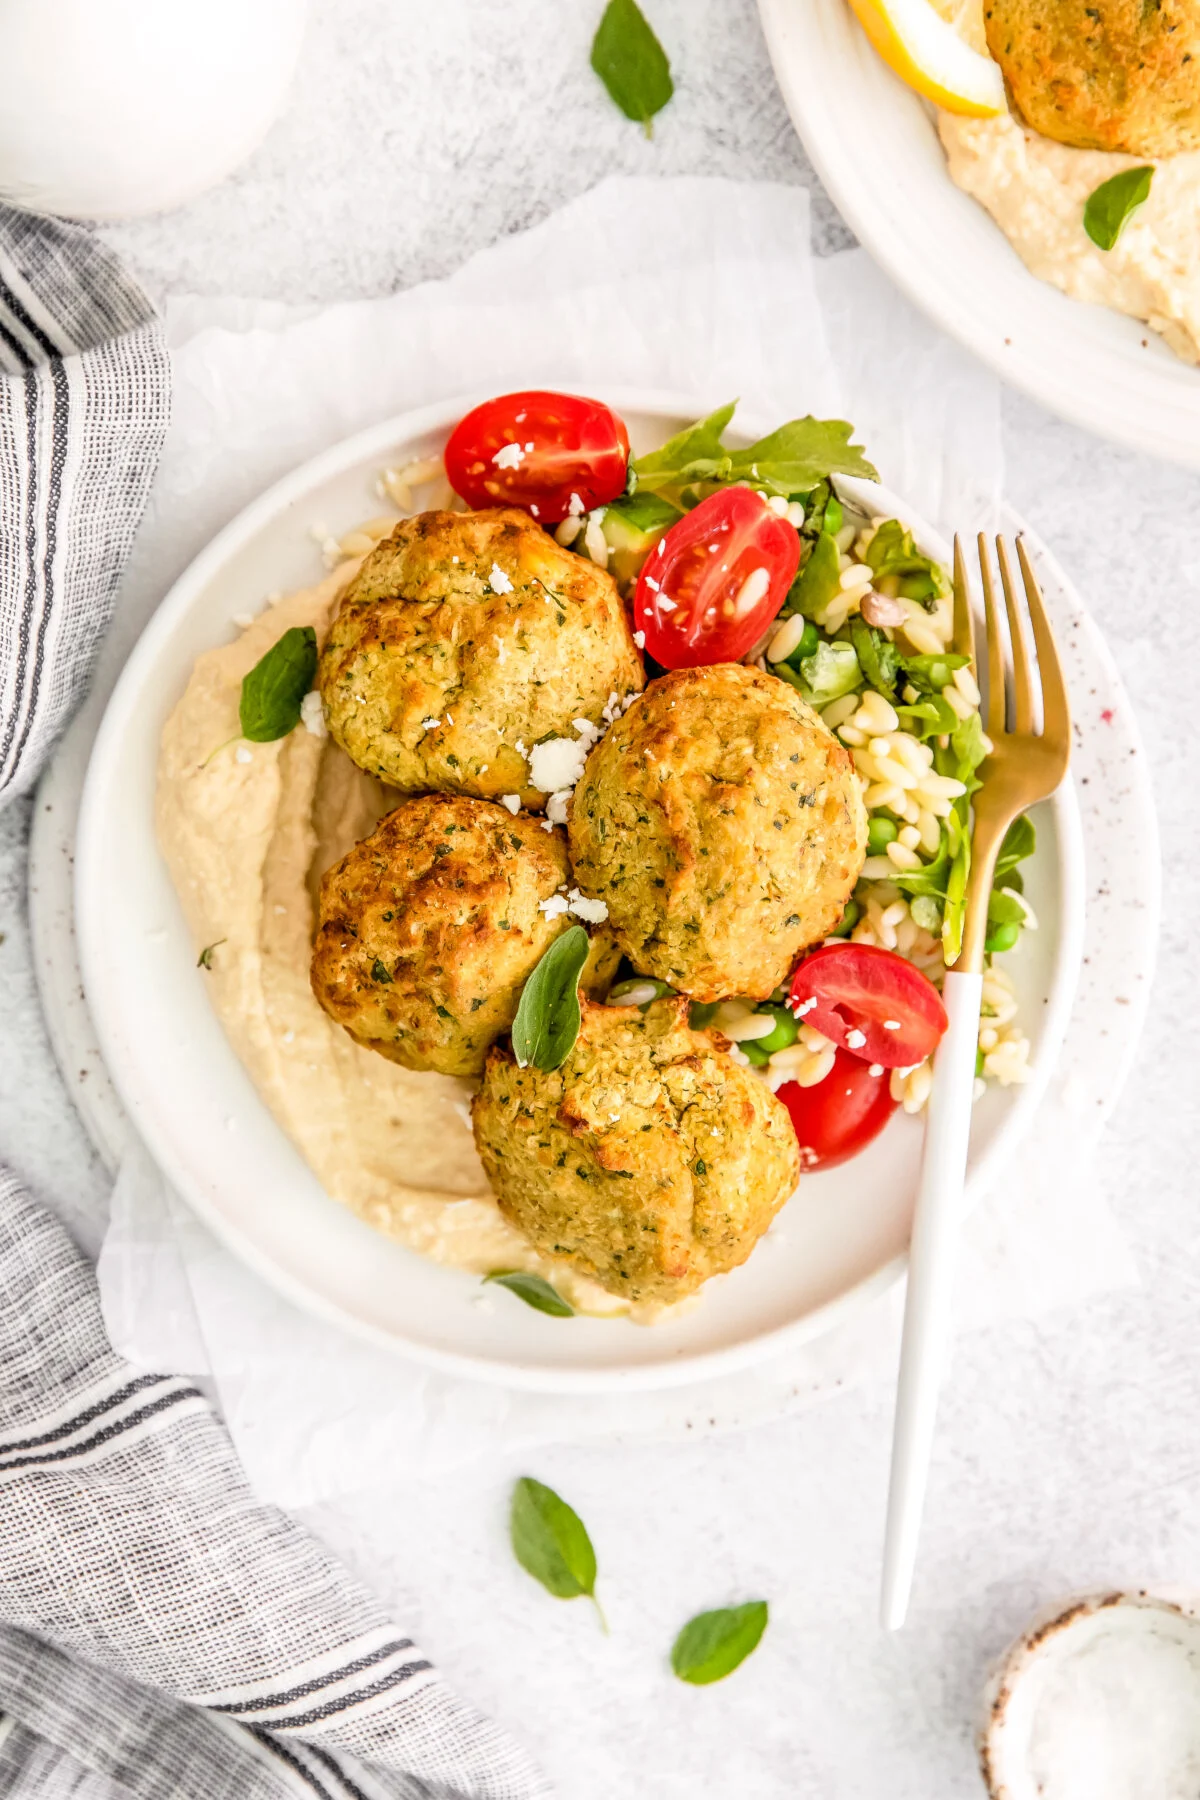 This air fryer falafel recipe is an easy and healthy way to make falafel that are crispy on the outside and deliciously soft on the inside.